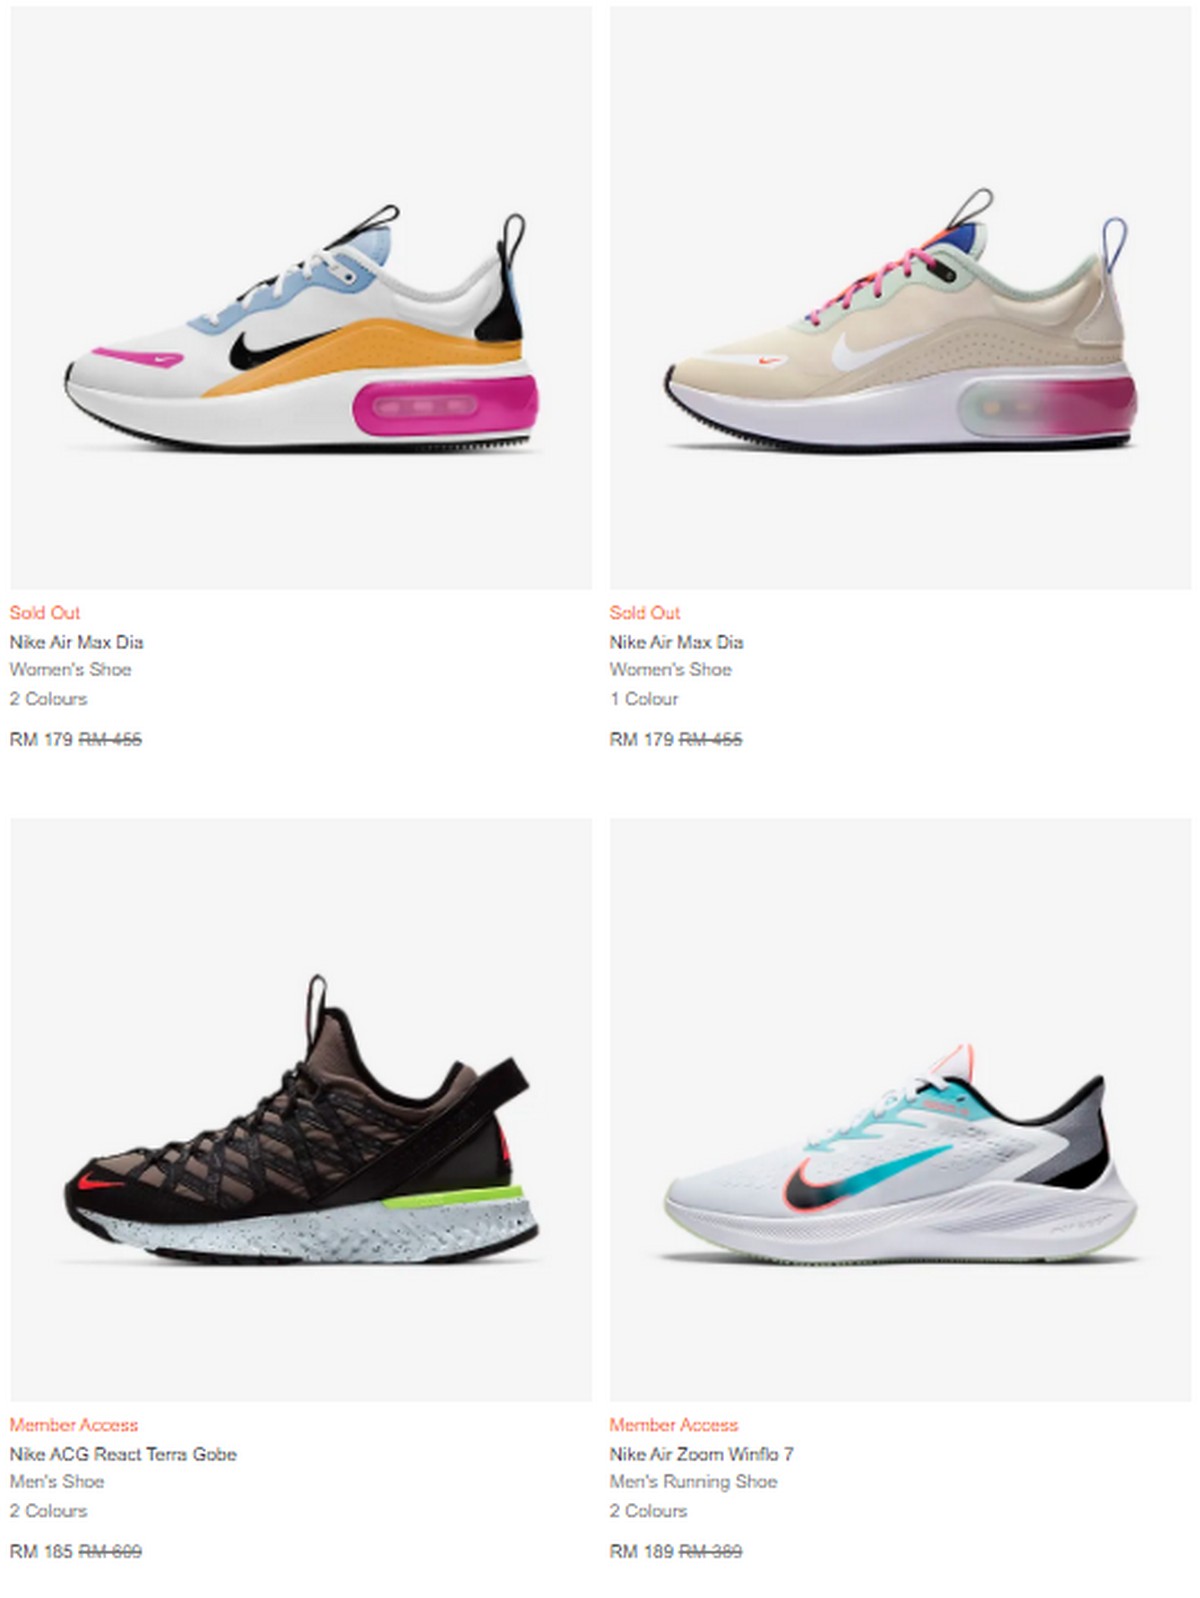 nike-11-11-preview-offer-new-5 - LifeStyle 